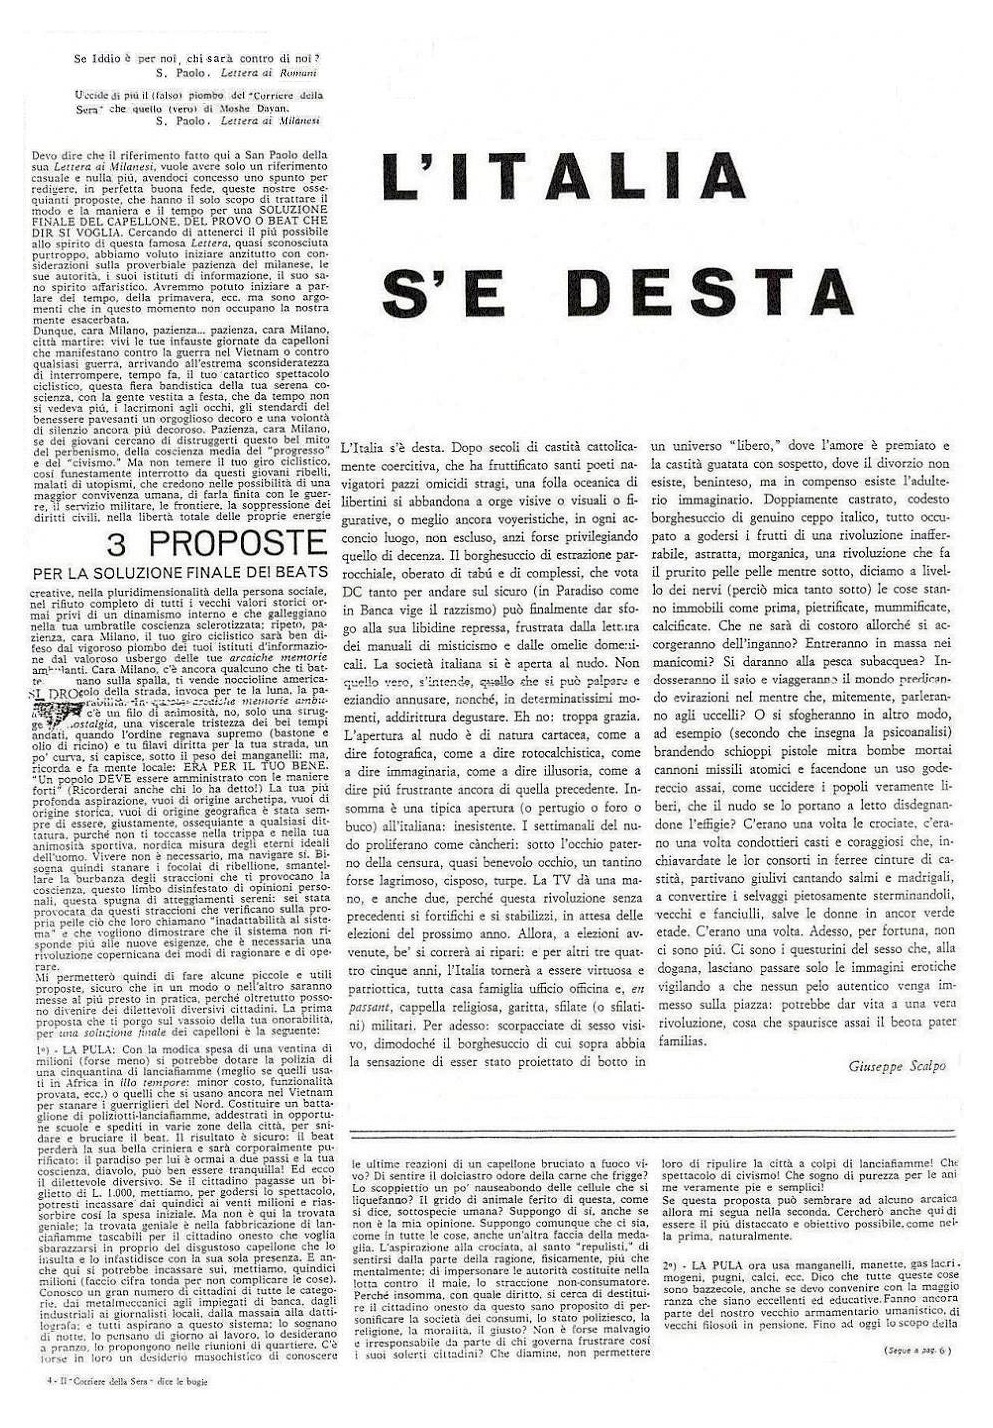 The seventh and last issue of Mondo Beat magazine - Milan, late July 1967 - Edition: the number of copies is unknown